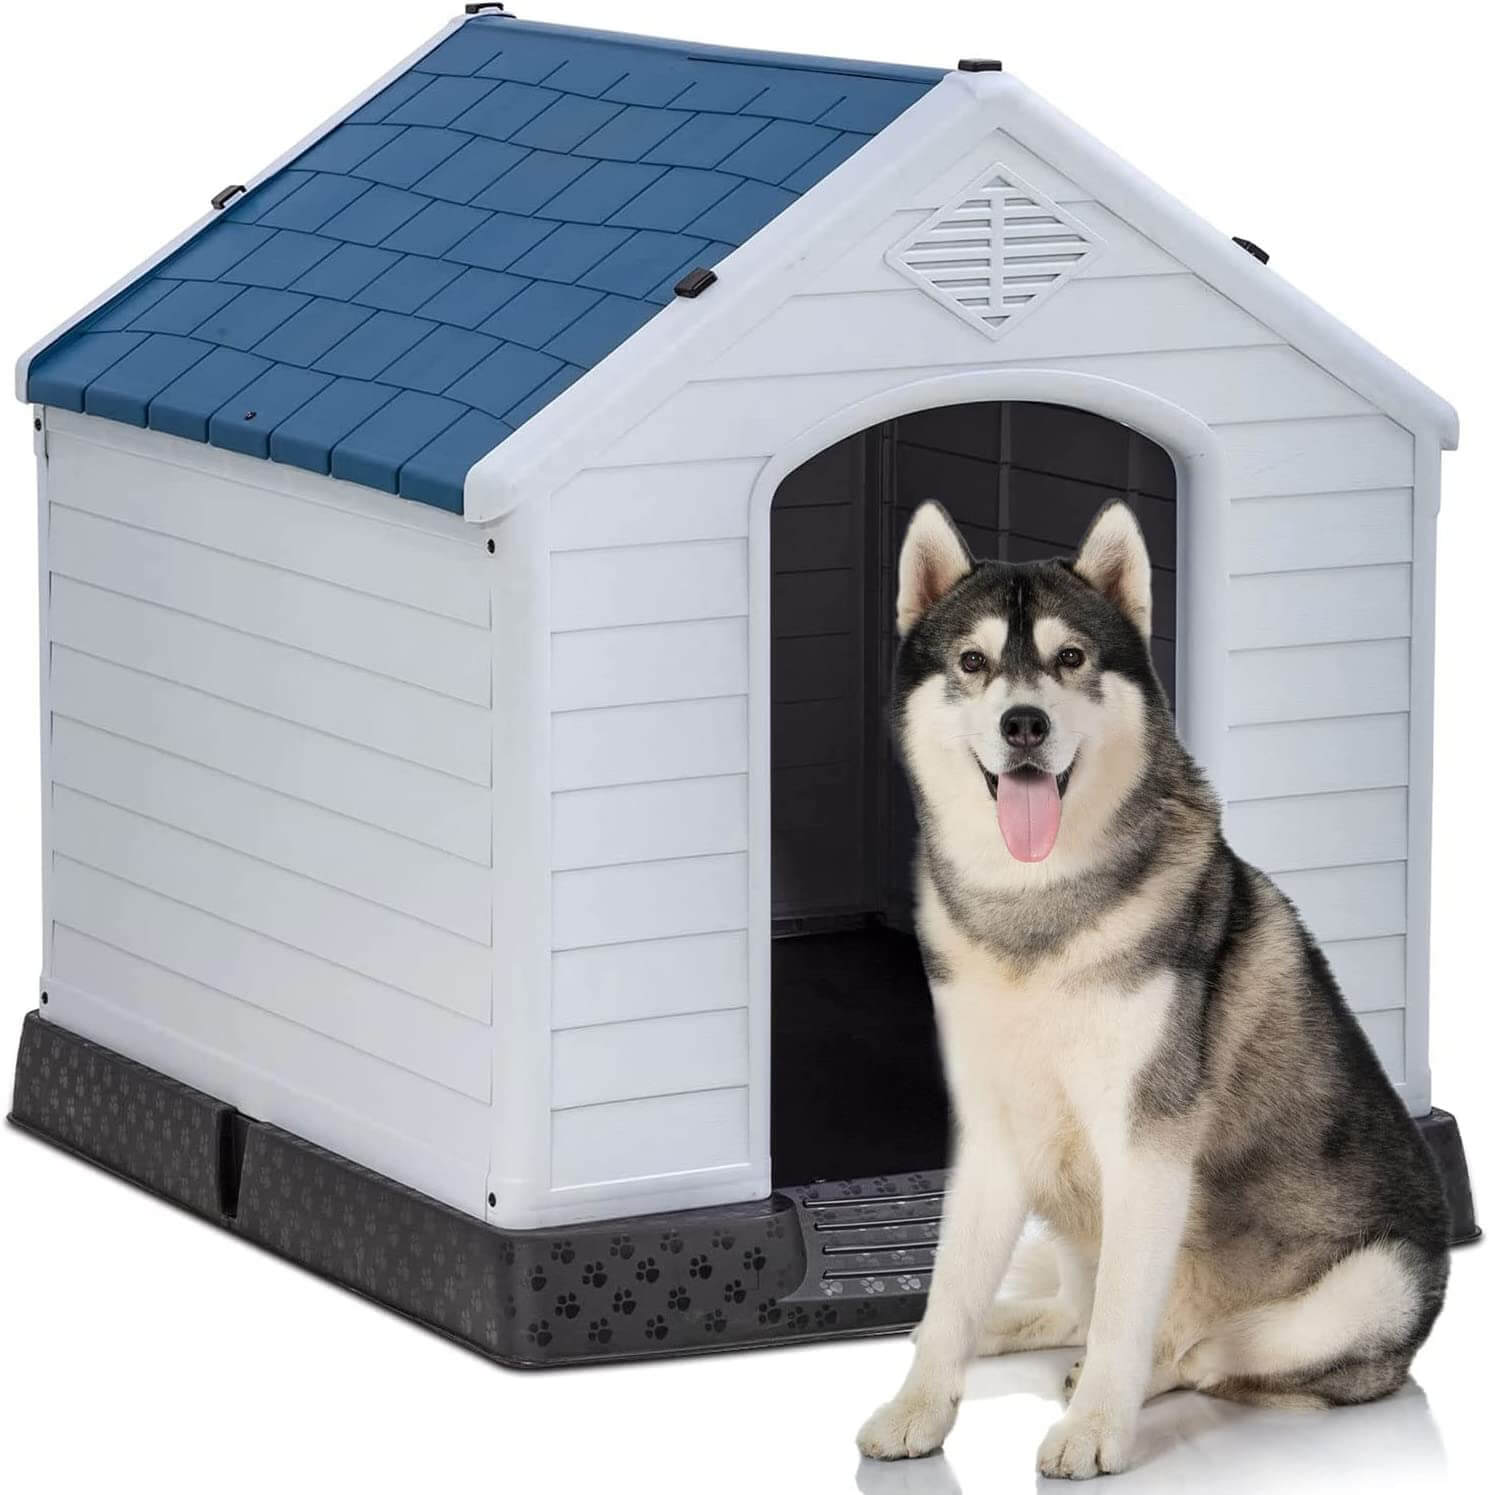 BestPet Plastic Dog House Waterproof with Air Vents and Elevated Floor